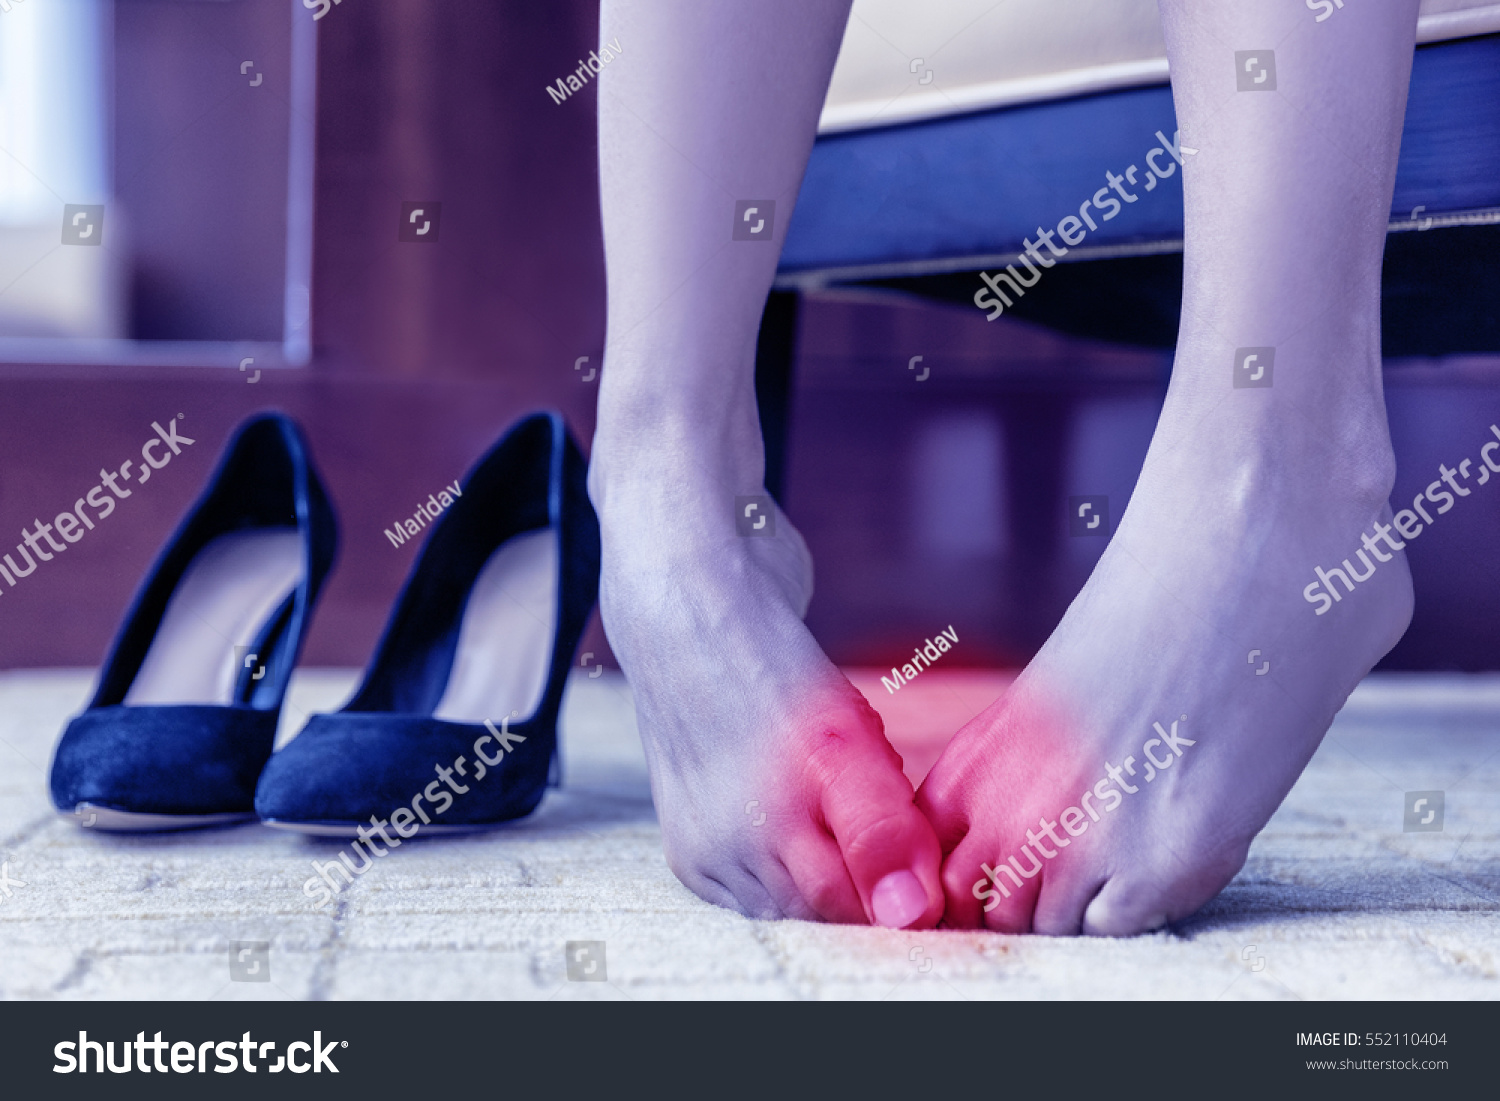 Medical concept. Foot pain. Body health problem, healthy feet swollen joints or blisters, wounds on skin. Painful barefoot woman at home or office with high heels in the background #552110404